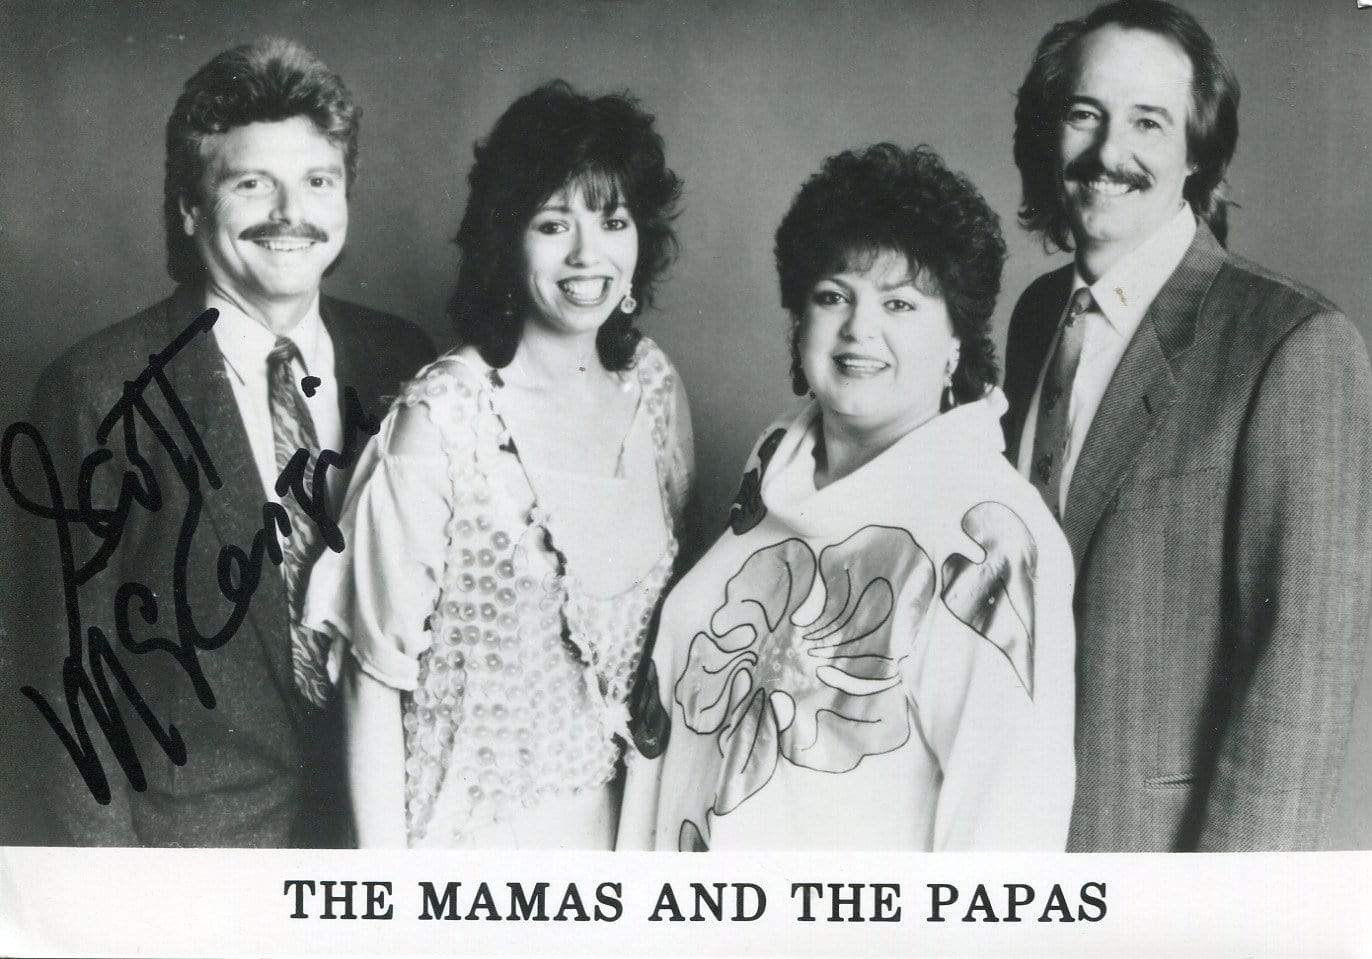 THE MAMAS AND THE PAPAS autograph